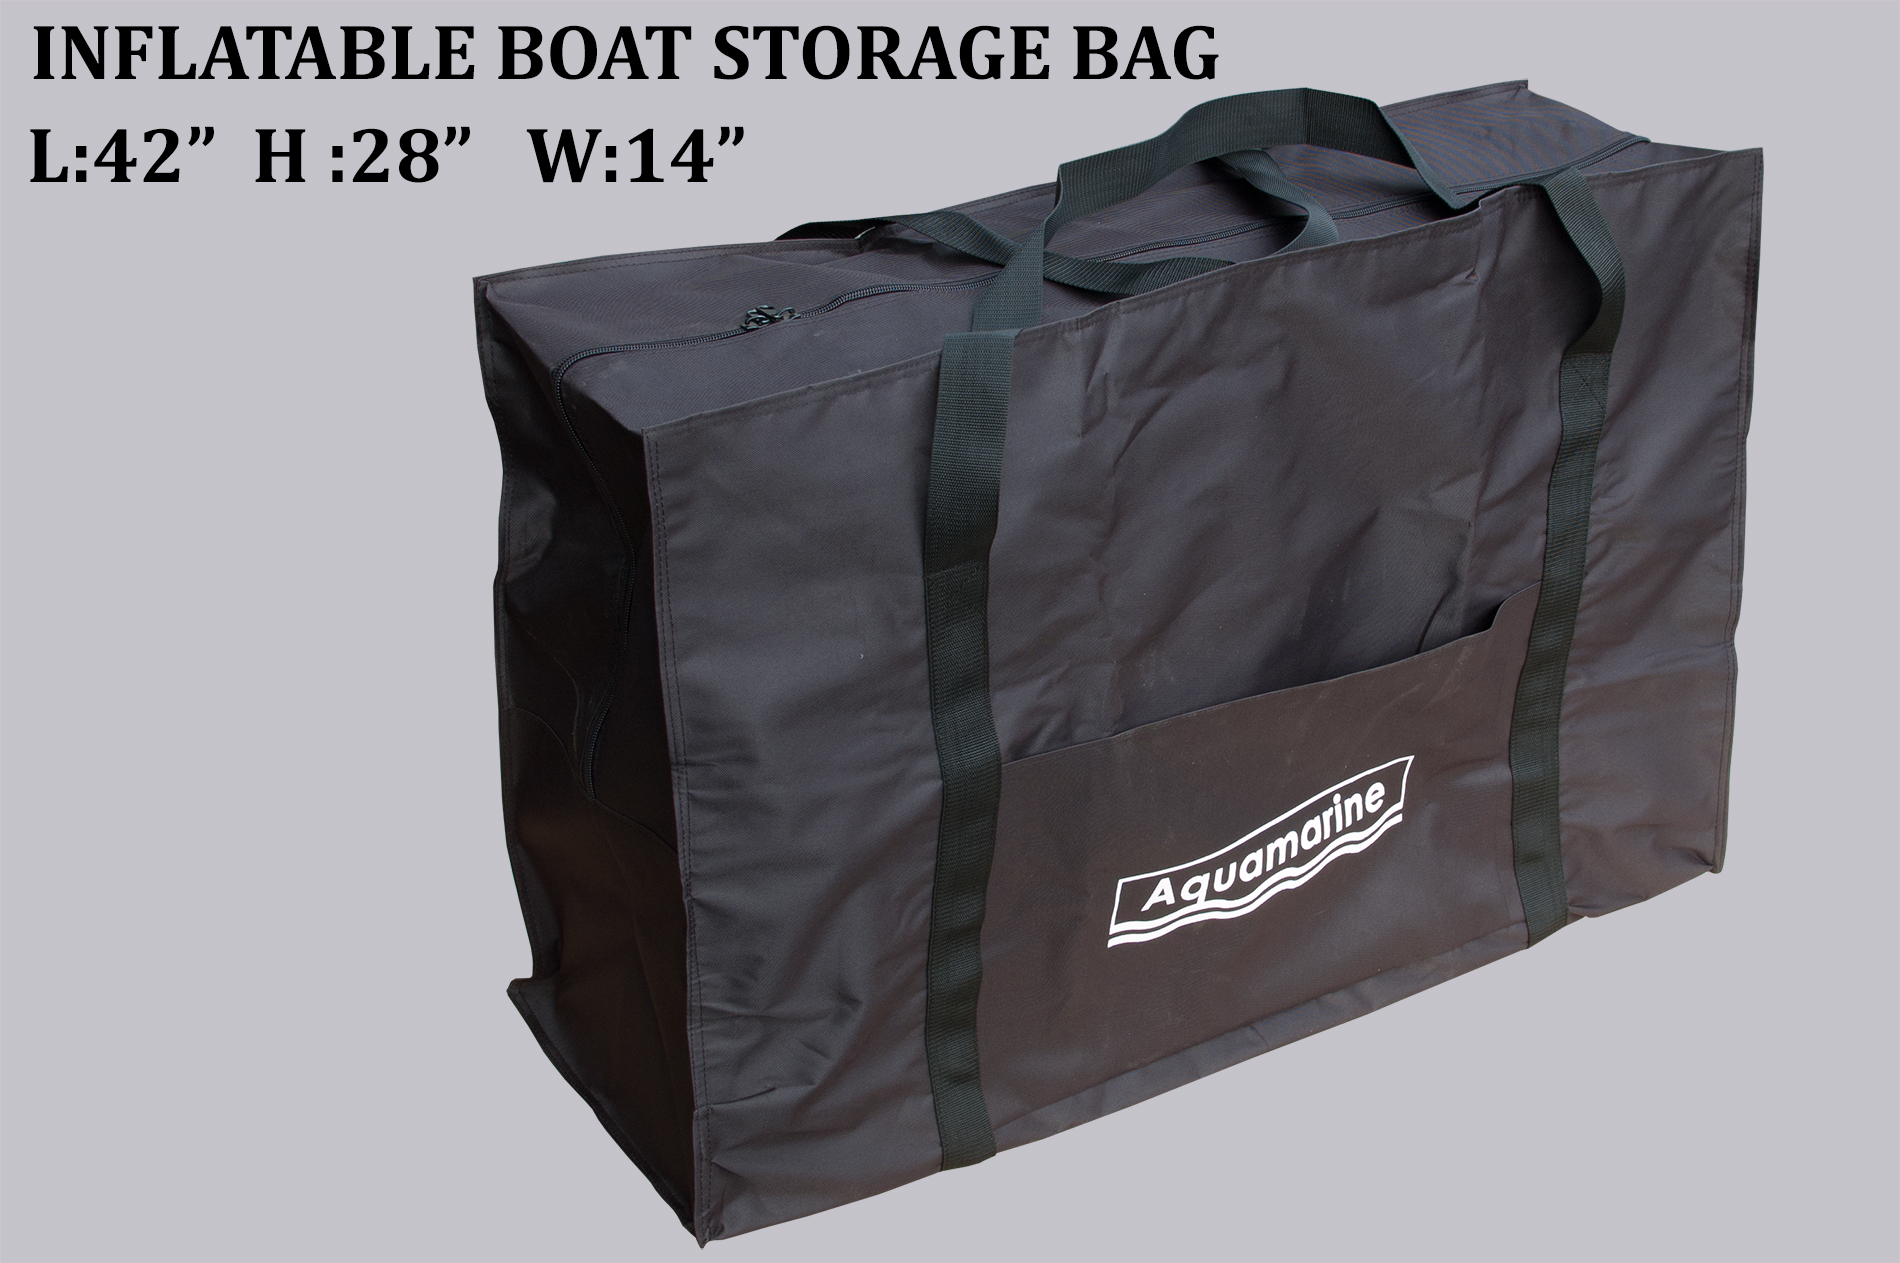 https://www.aquamarineboat.com/images/products/sb/blk/storage_carrying_bag_inflatable_boat_01sc.jpg